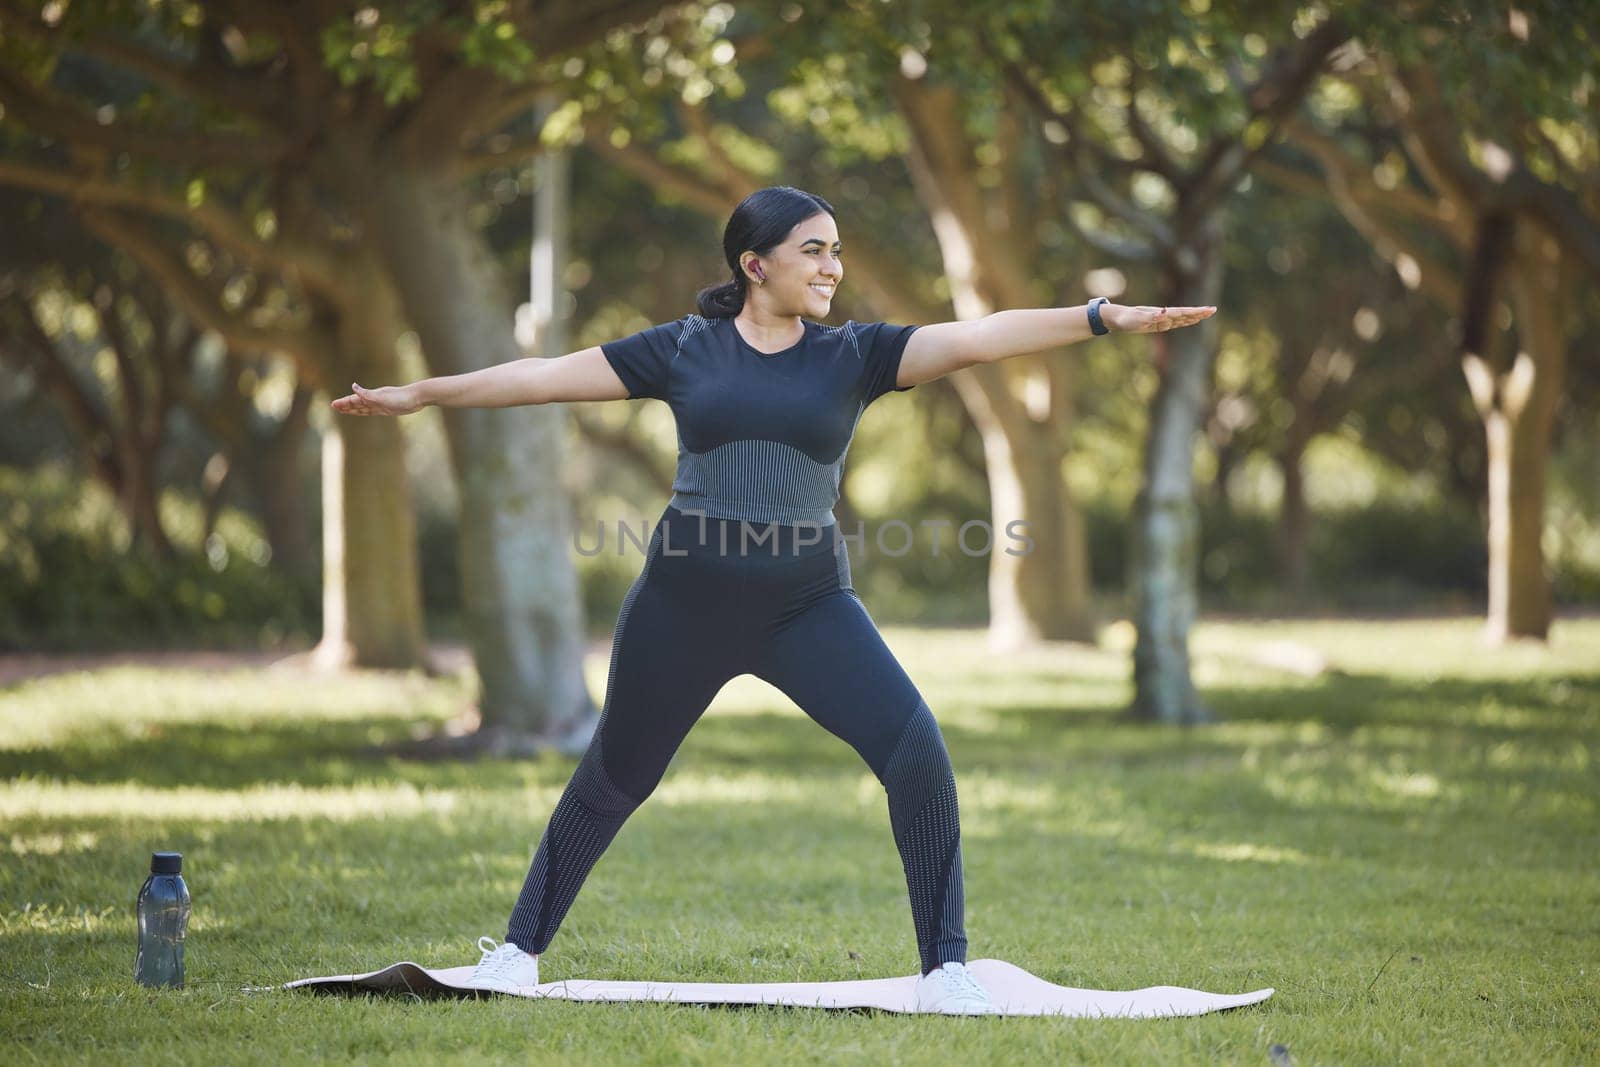 Yoga, stretching and lose weight of woman with body wellness, fitness training and pilates workout in nature park field. Mental health, healthy lifestyle and exercise sports person outdoor stretching.